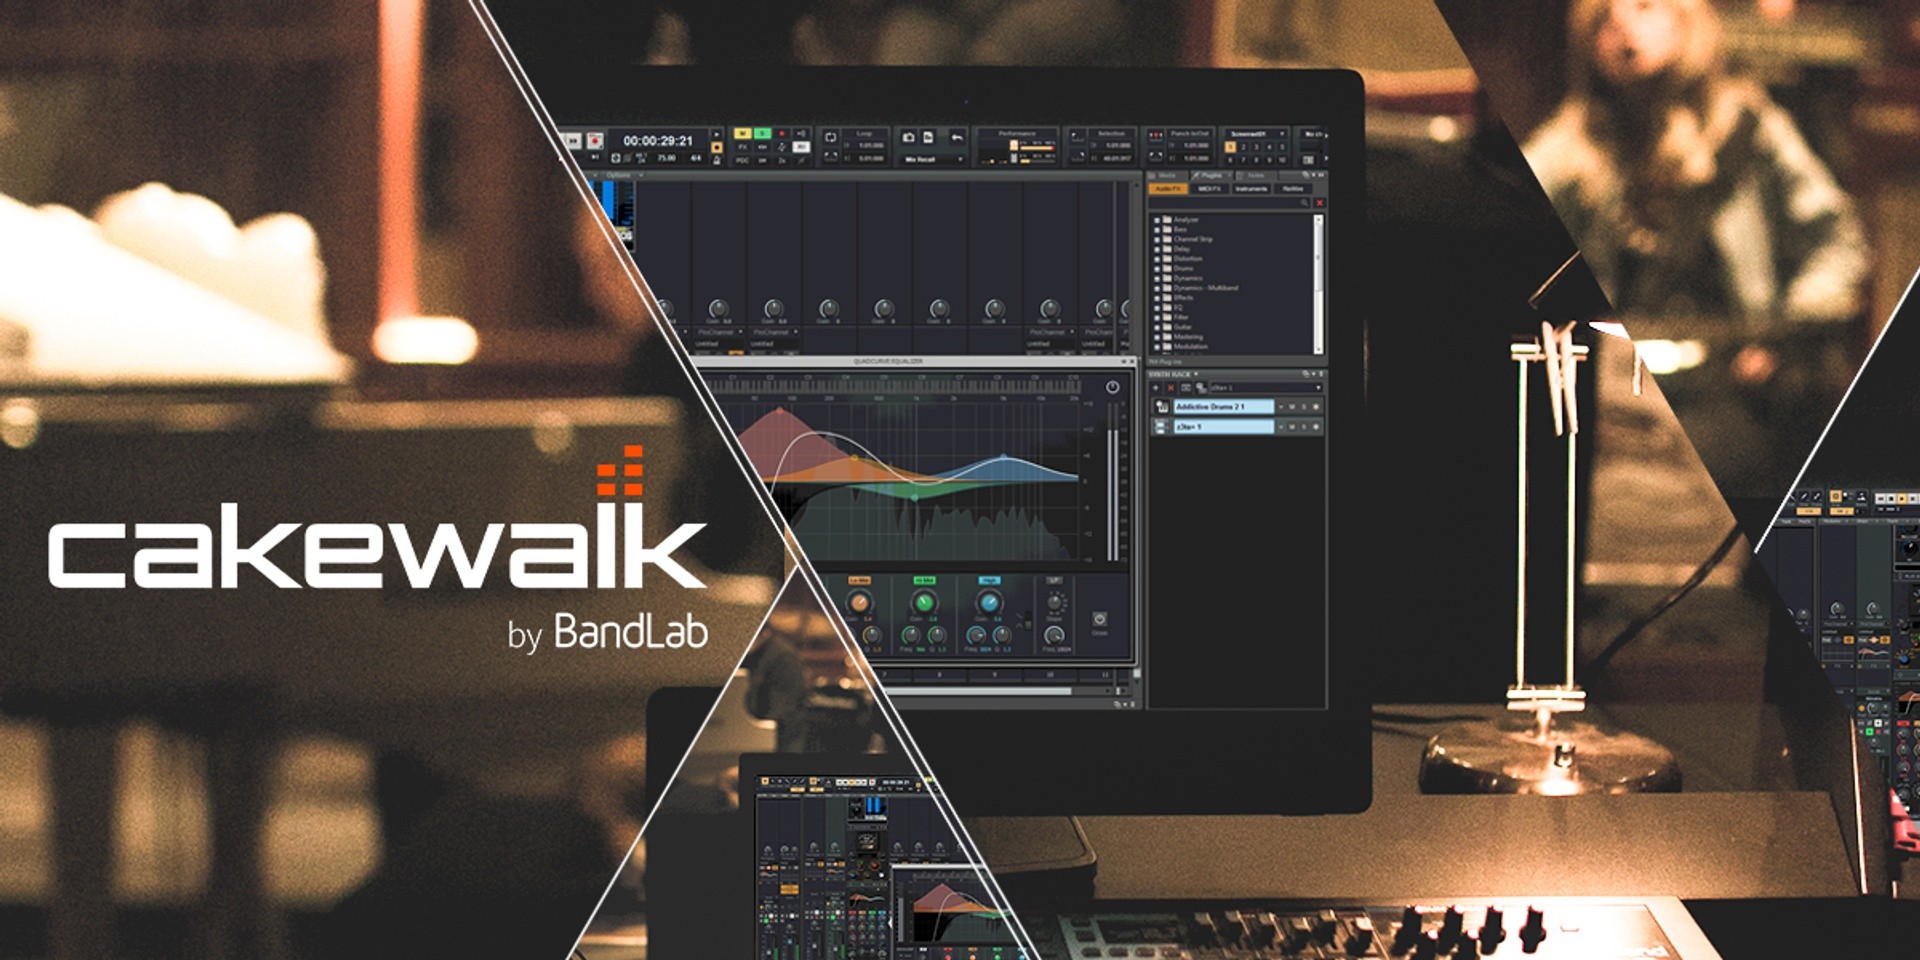 BandLab relaunches Sonar audio software as Cakewalk by BandLab, Windows version now free to download